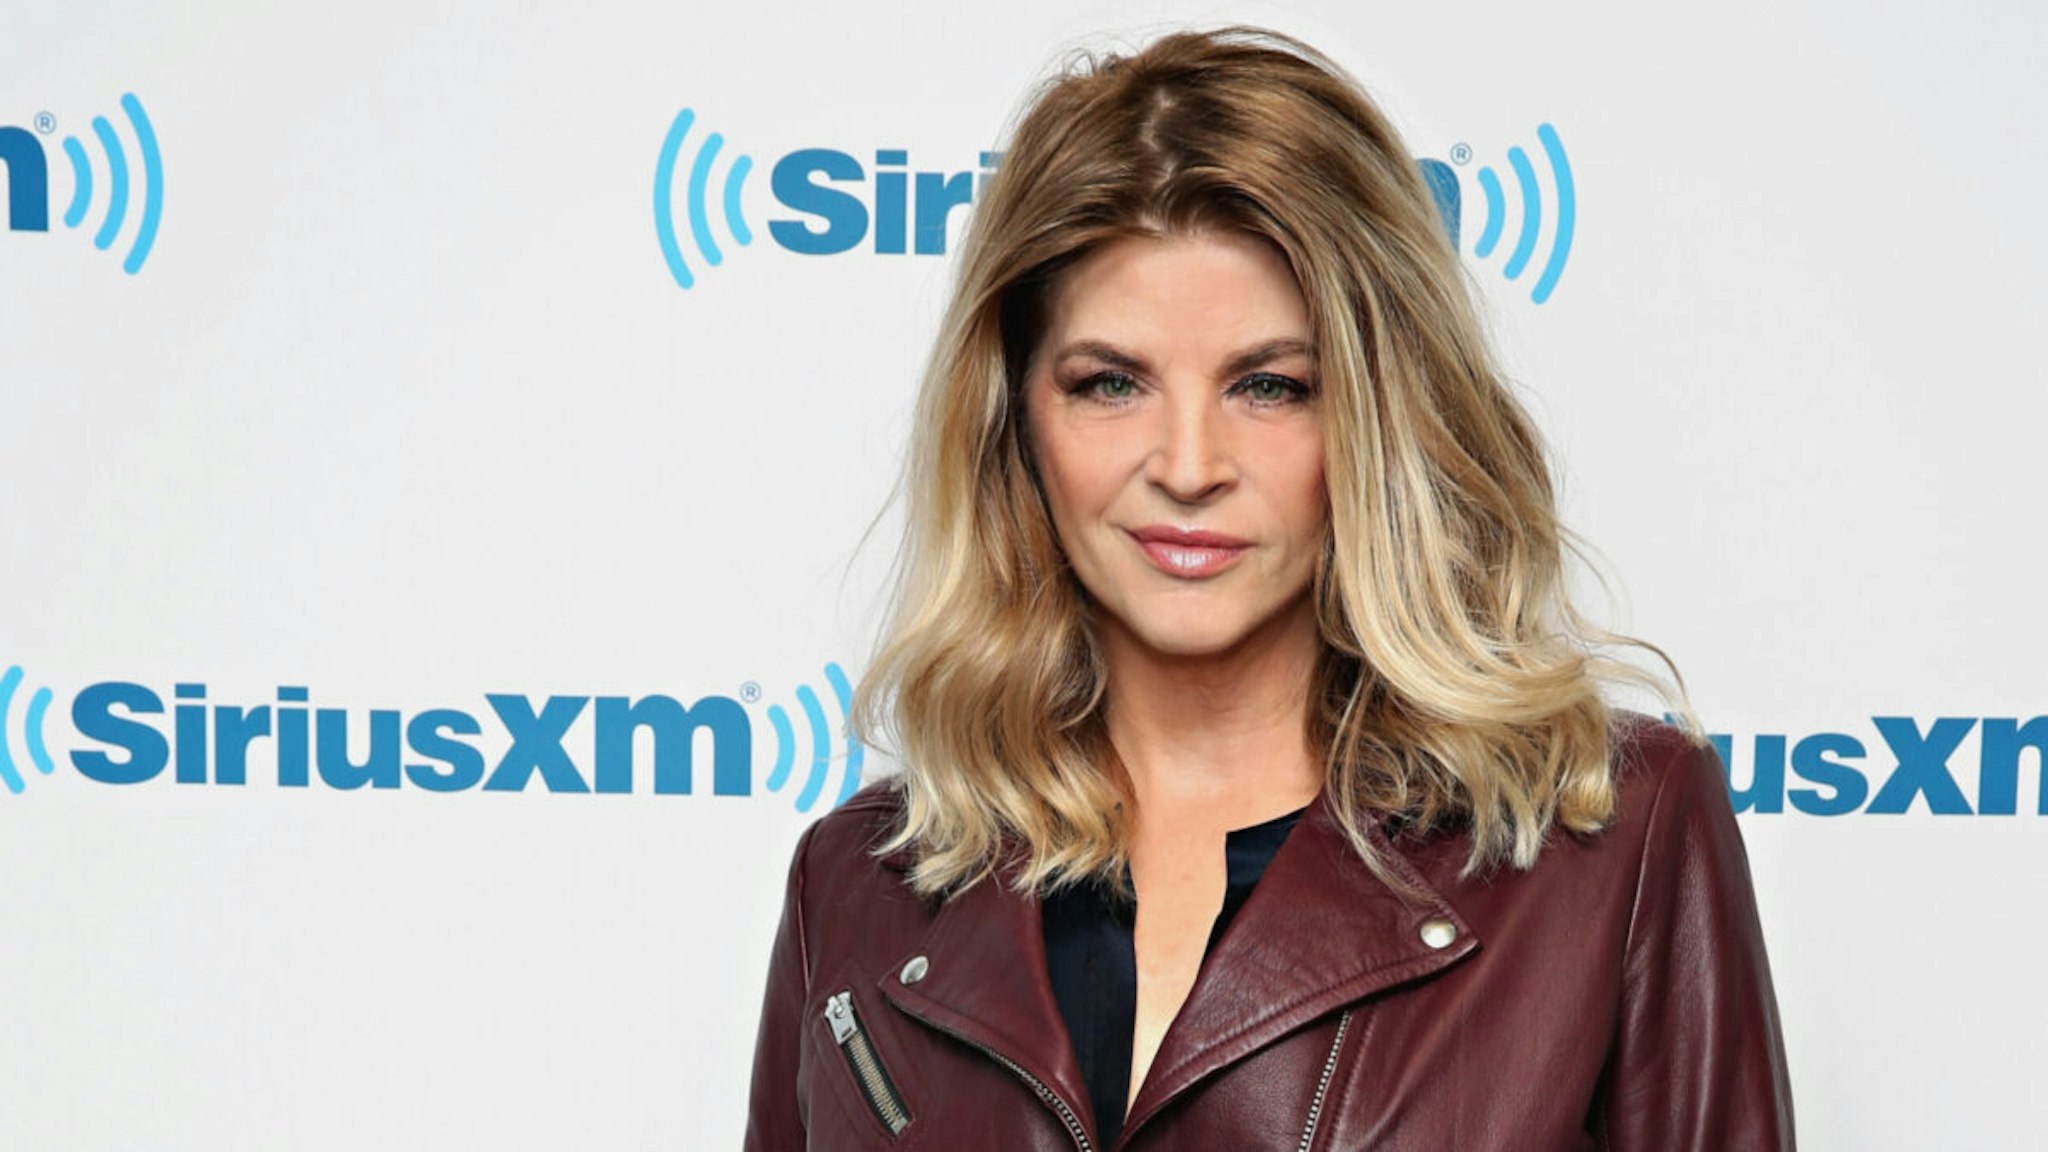 Actress Kirstie Alley visits the SiriusXM Studios on January 6, 2016 in New York City.